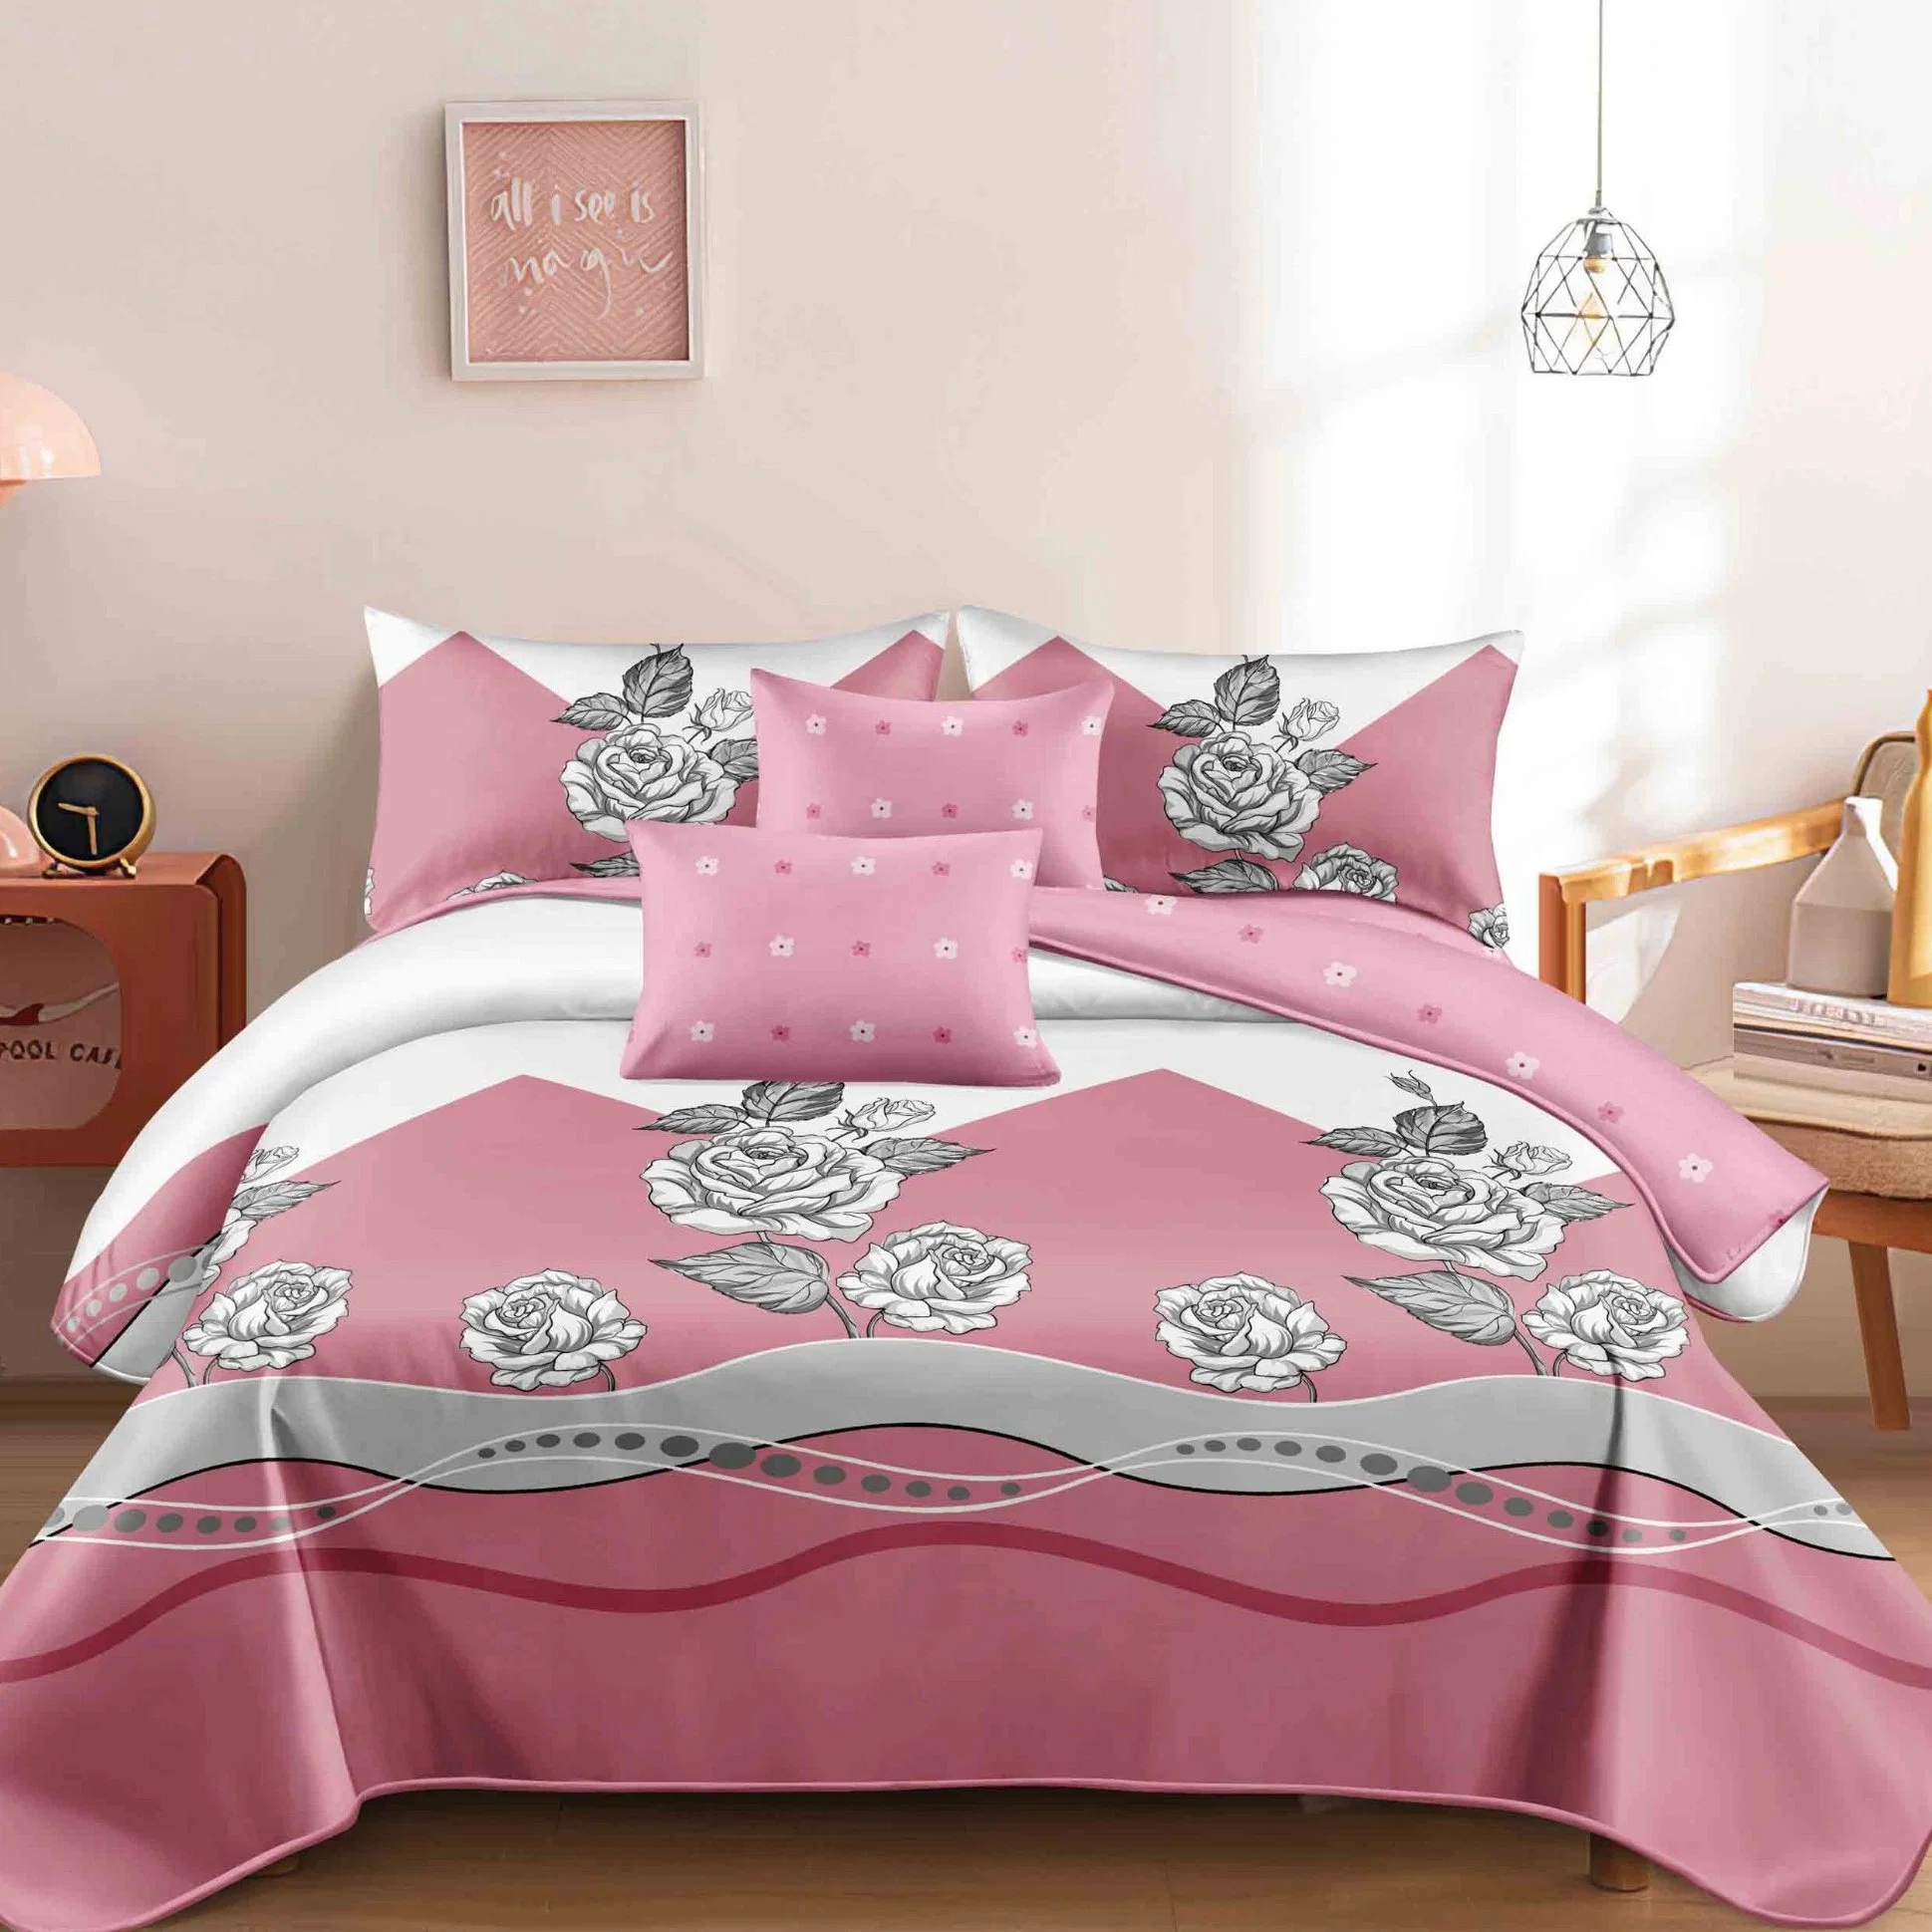 MID Esat Style Printed Bed Comforter with Filling Bedroom Set